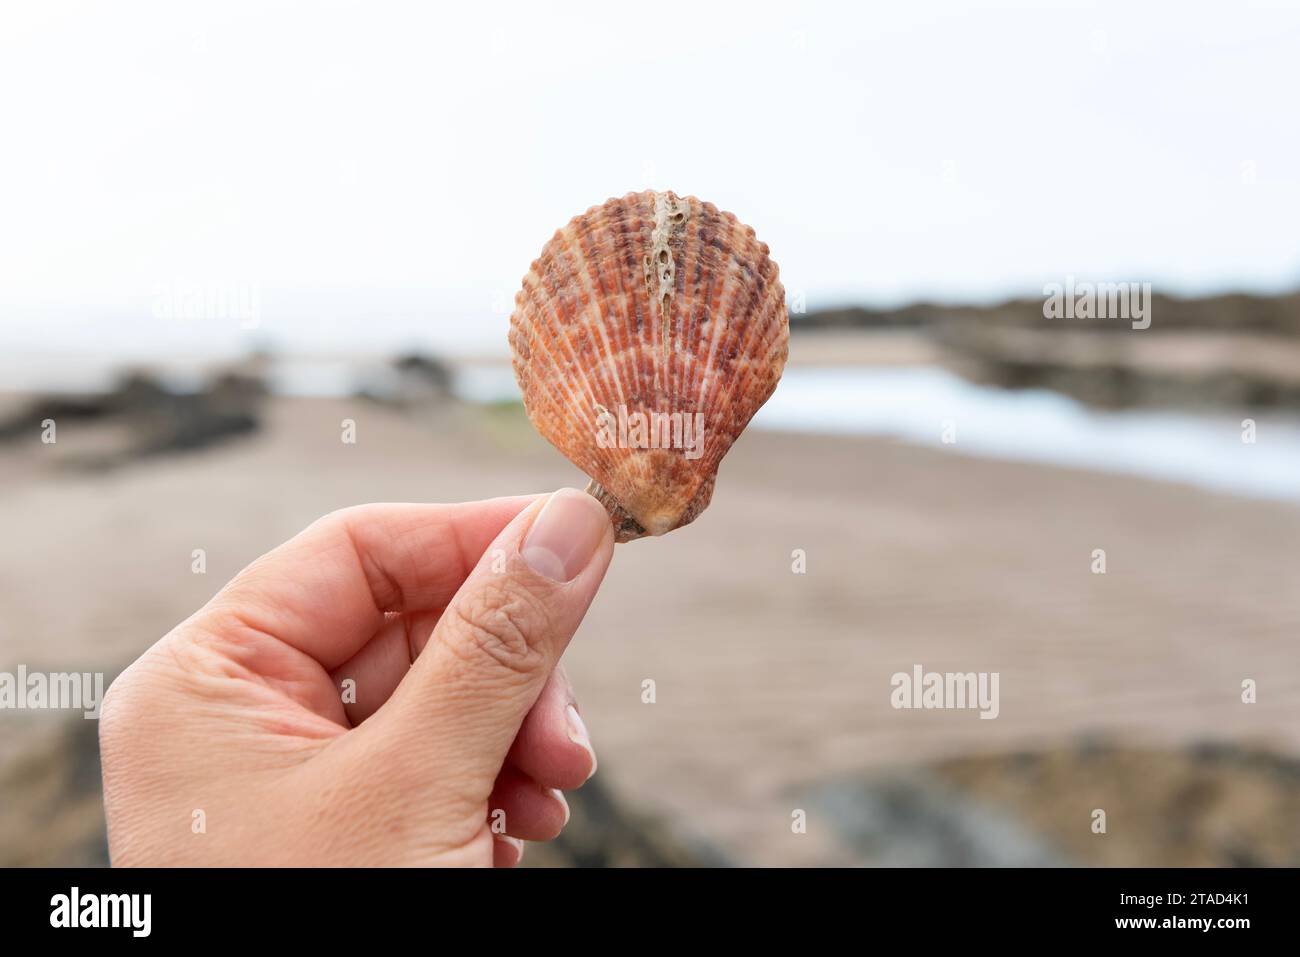 Worm casts on Variegated Scallop shell Stock Photo